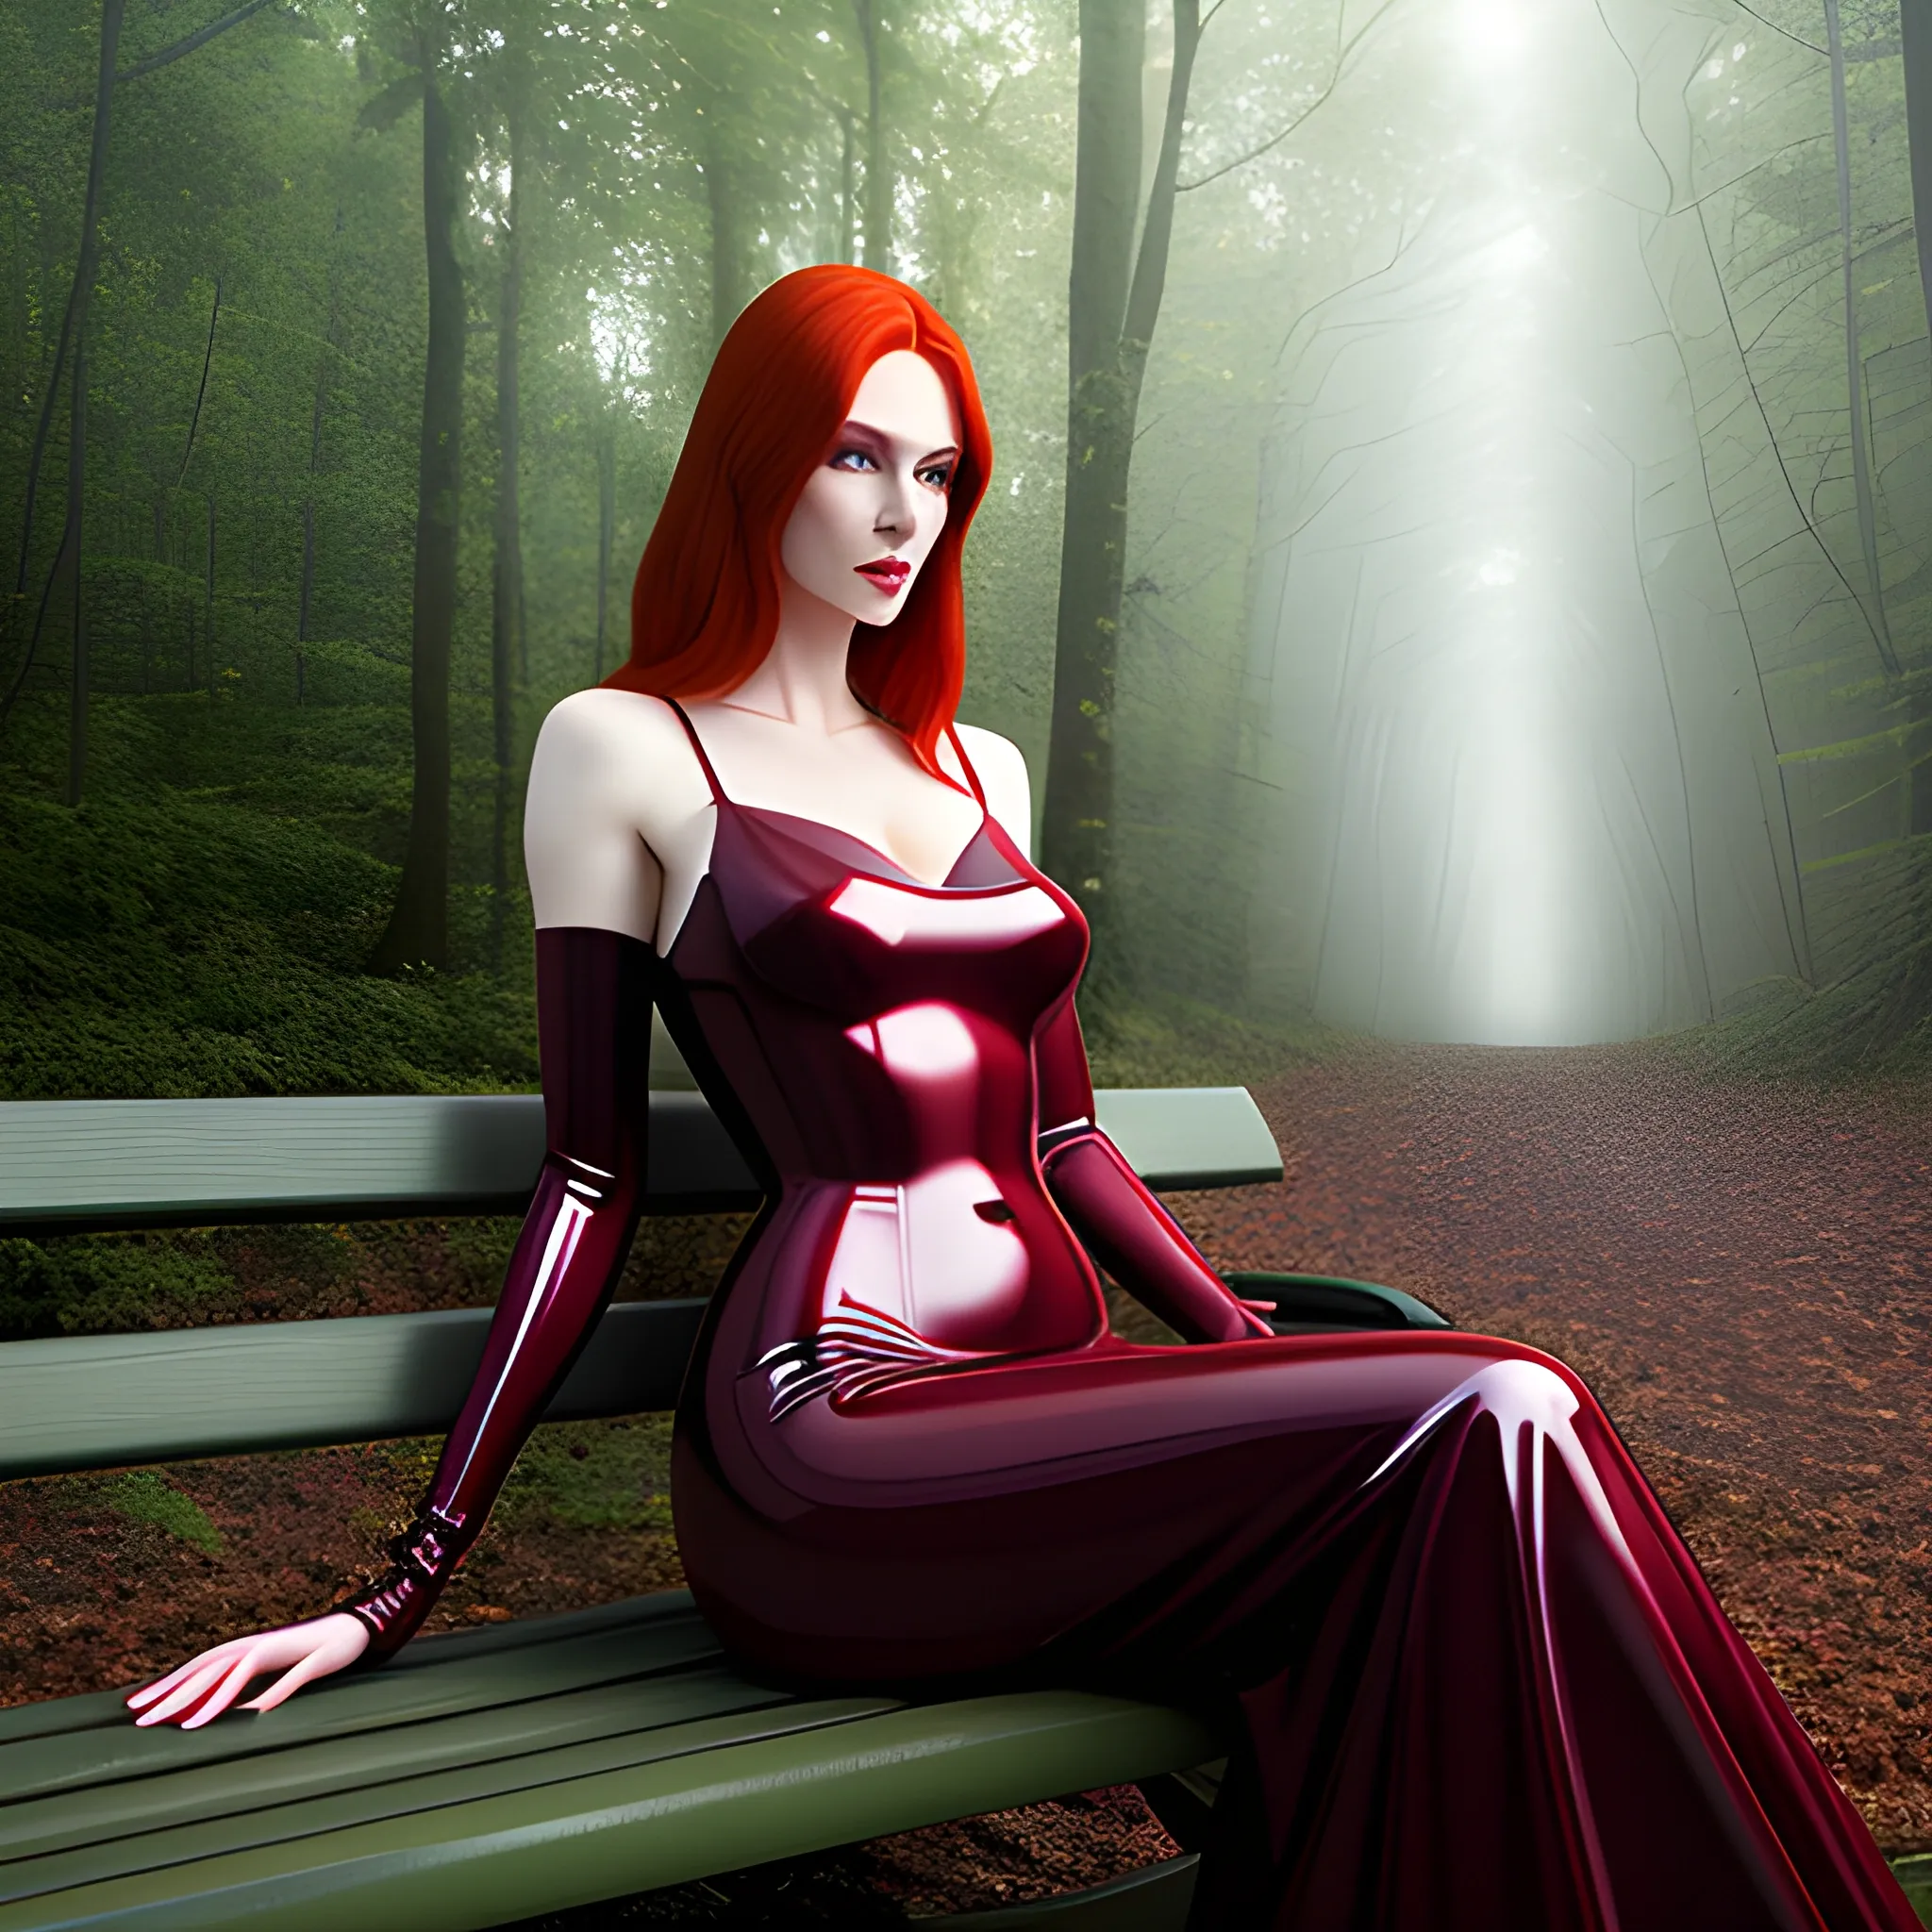 Create a photorealistic image of a young redhead woman with light green eyes and pale skin, wearing a dark red latex dress and sitting on a park bench. Chest visible, chest naked, whole body visible. In the background a gloomy forest in moonlight. High level of detail